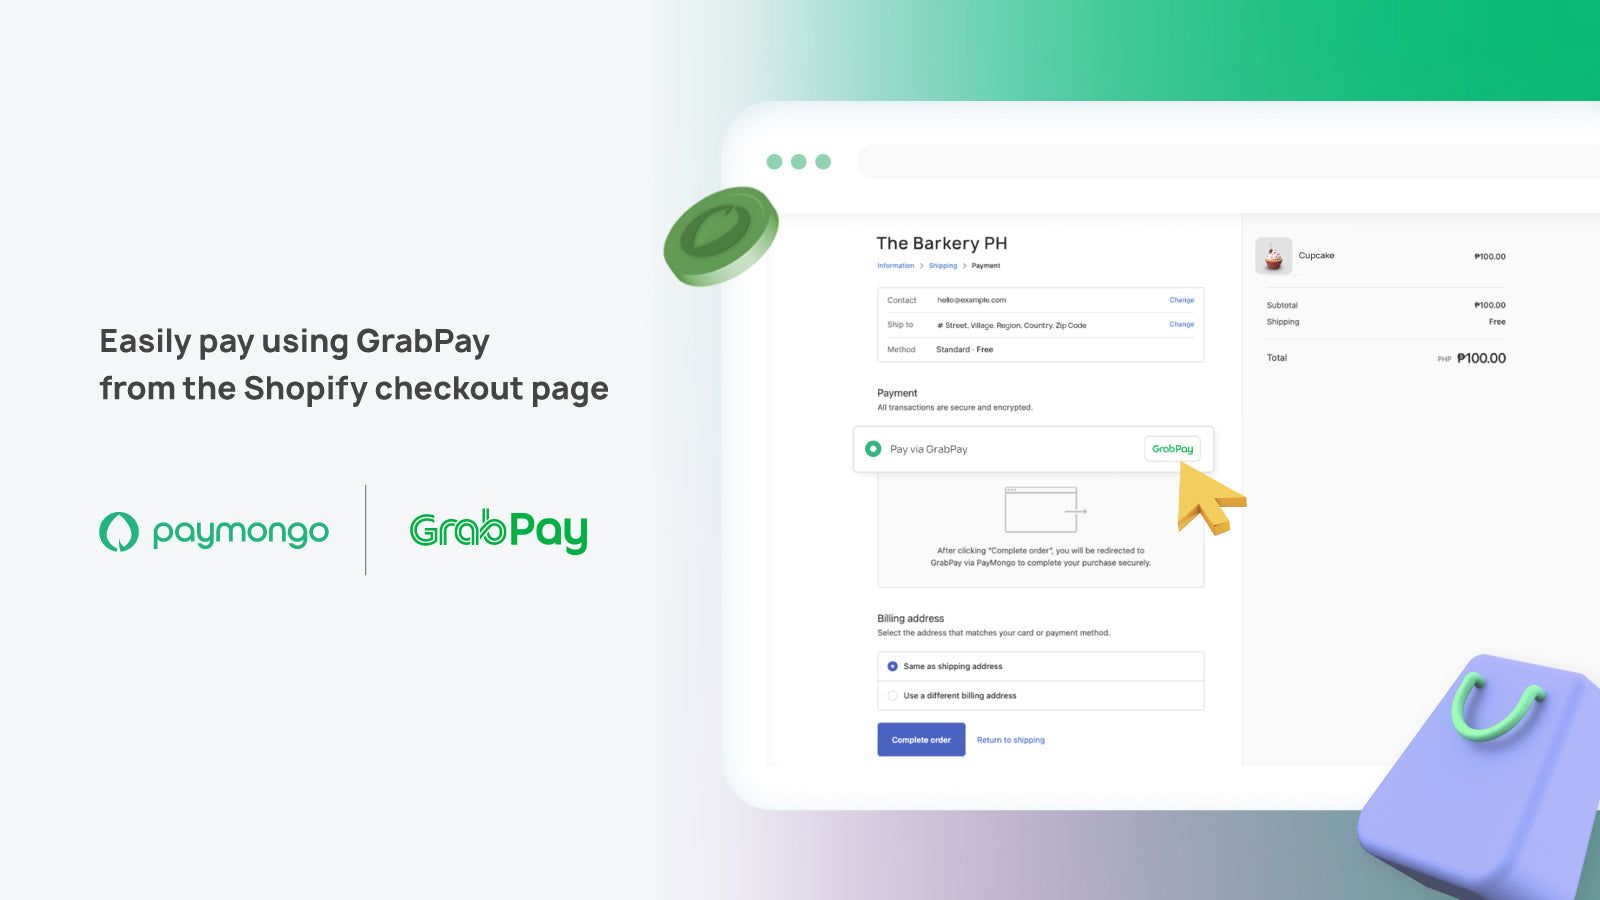 Easily pay using GrabPay from the Shopify checkout page.